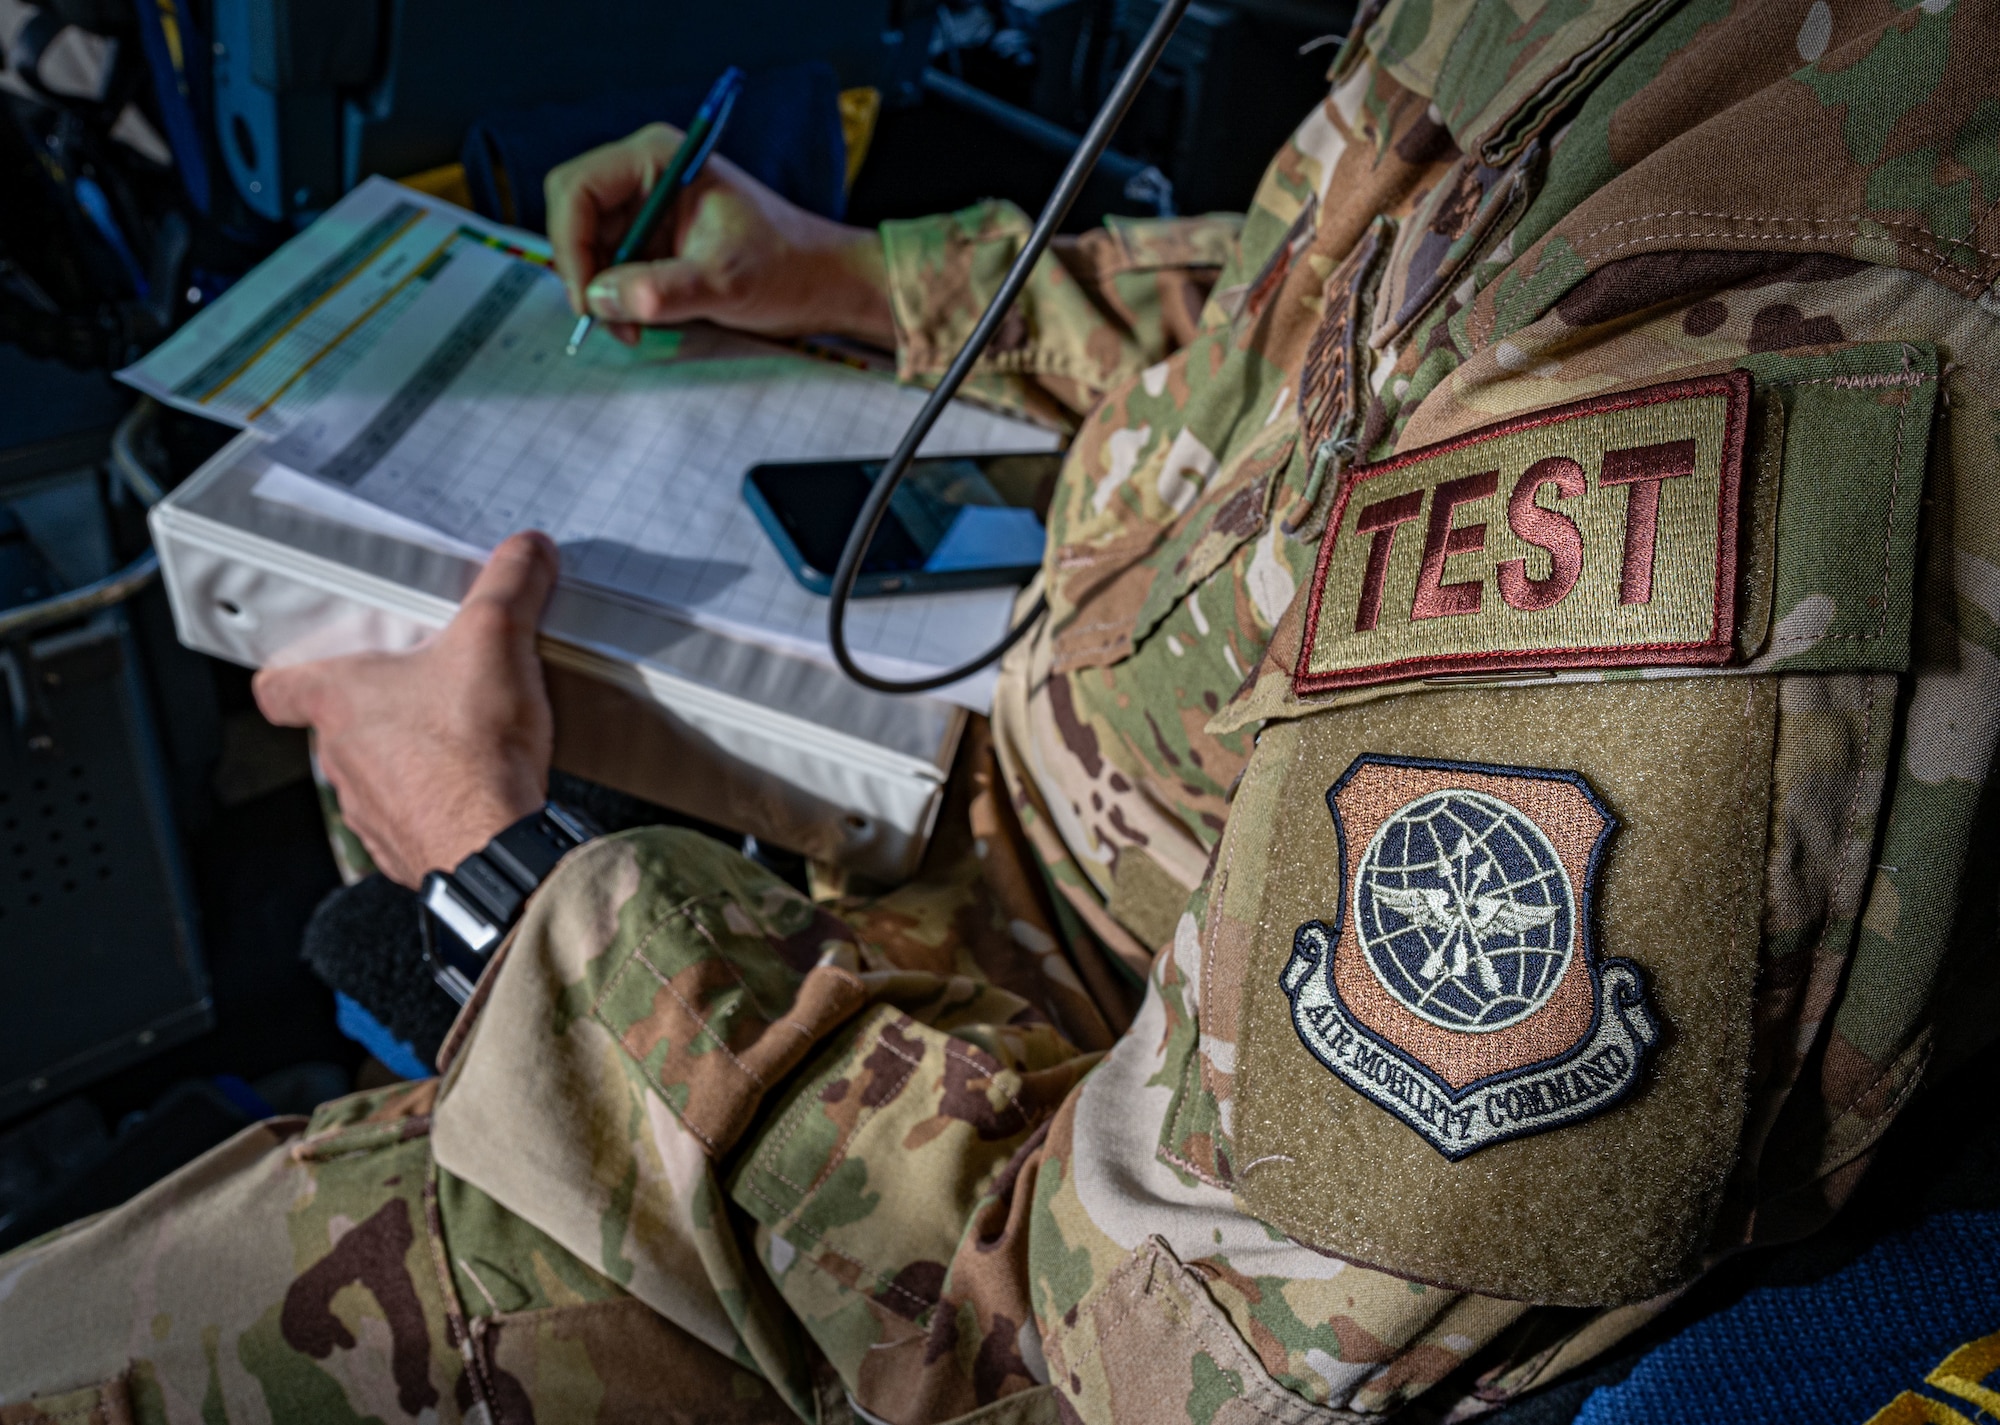 U.S. Air Force Capt. Daniel Fresella, Air Mobility test director, takes notes during combat offload Method C testing at Dover Air Force Base, Delaware, Jan. 23, 2024. The new combat offload Method C would allow C-17 Globemaster IIIs to deliver cargo without the assistance of any material handling equipment. (U.S. Air Force photo by Airman 1st Class Amanda Jett)